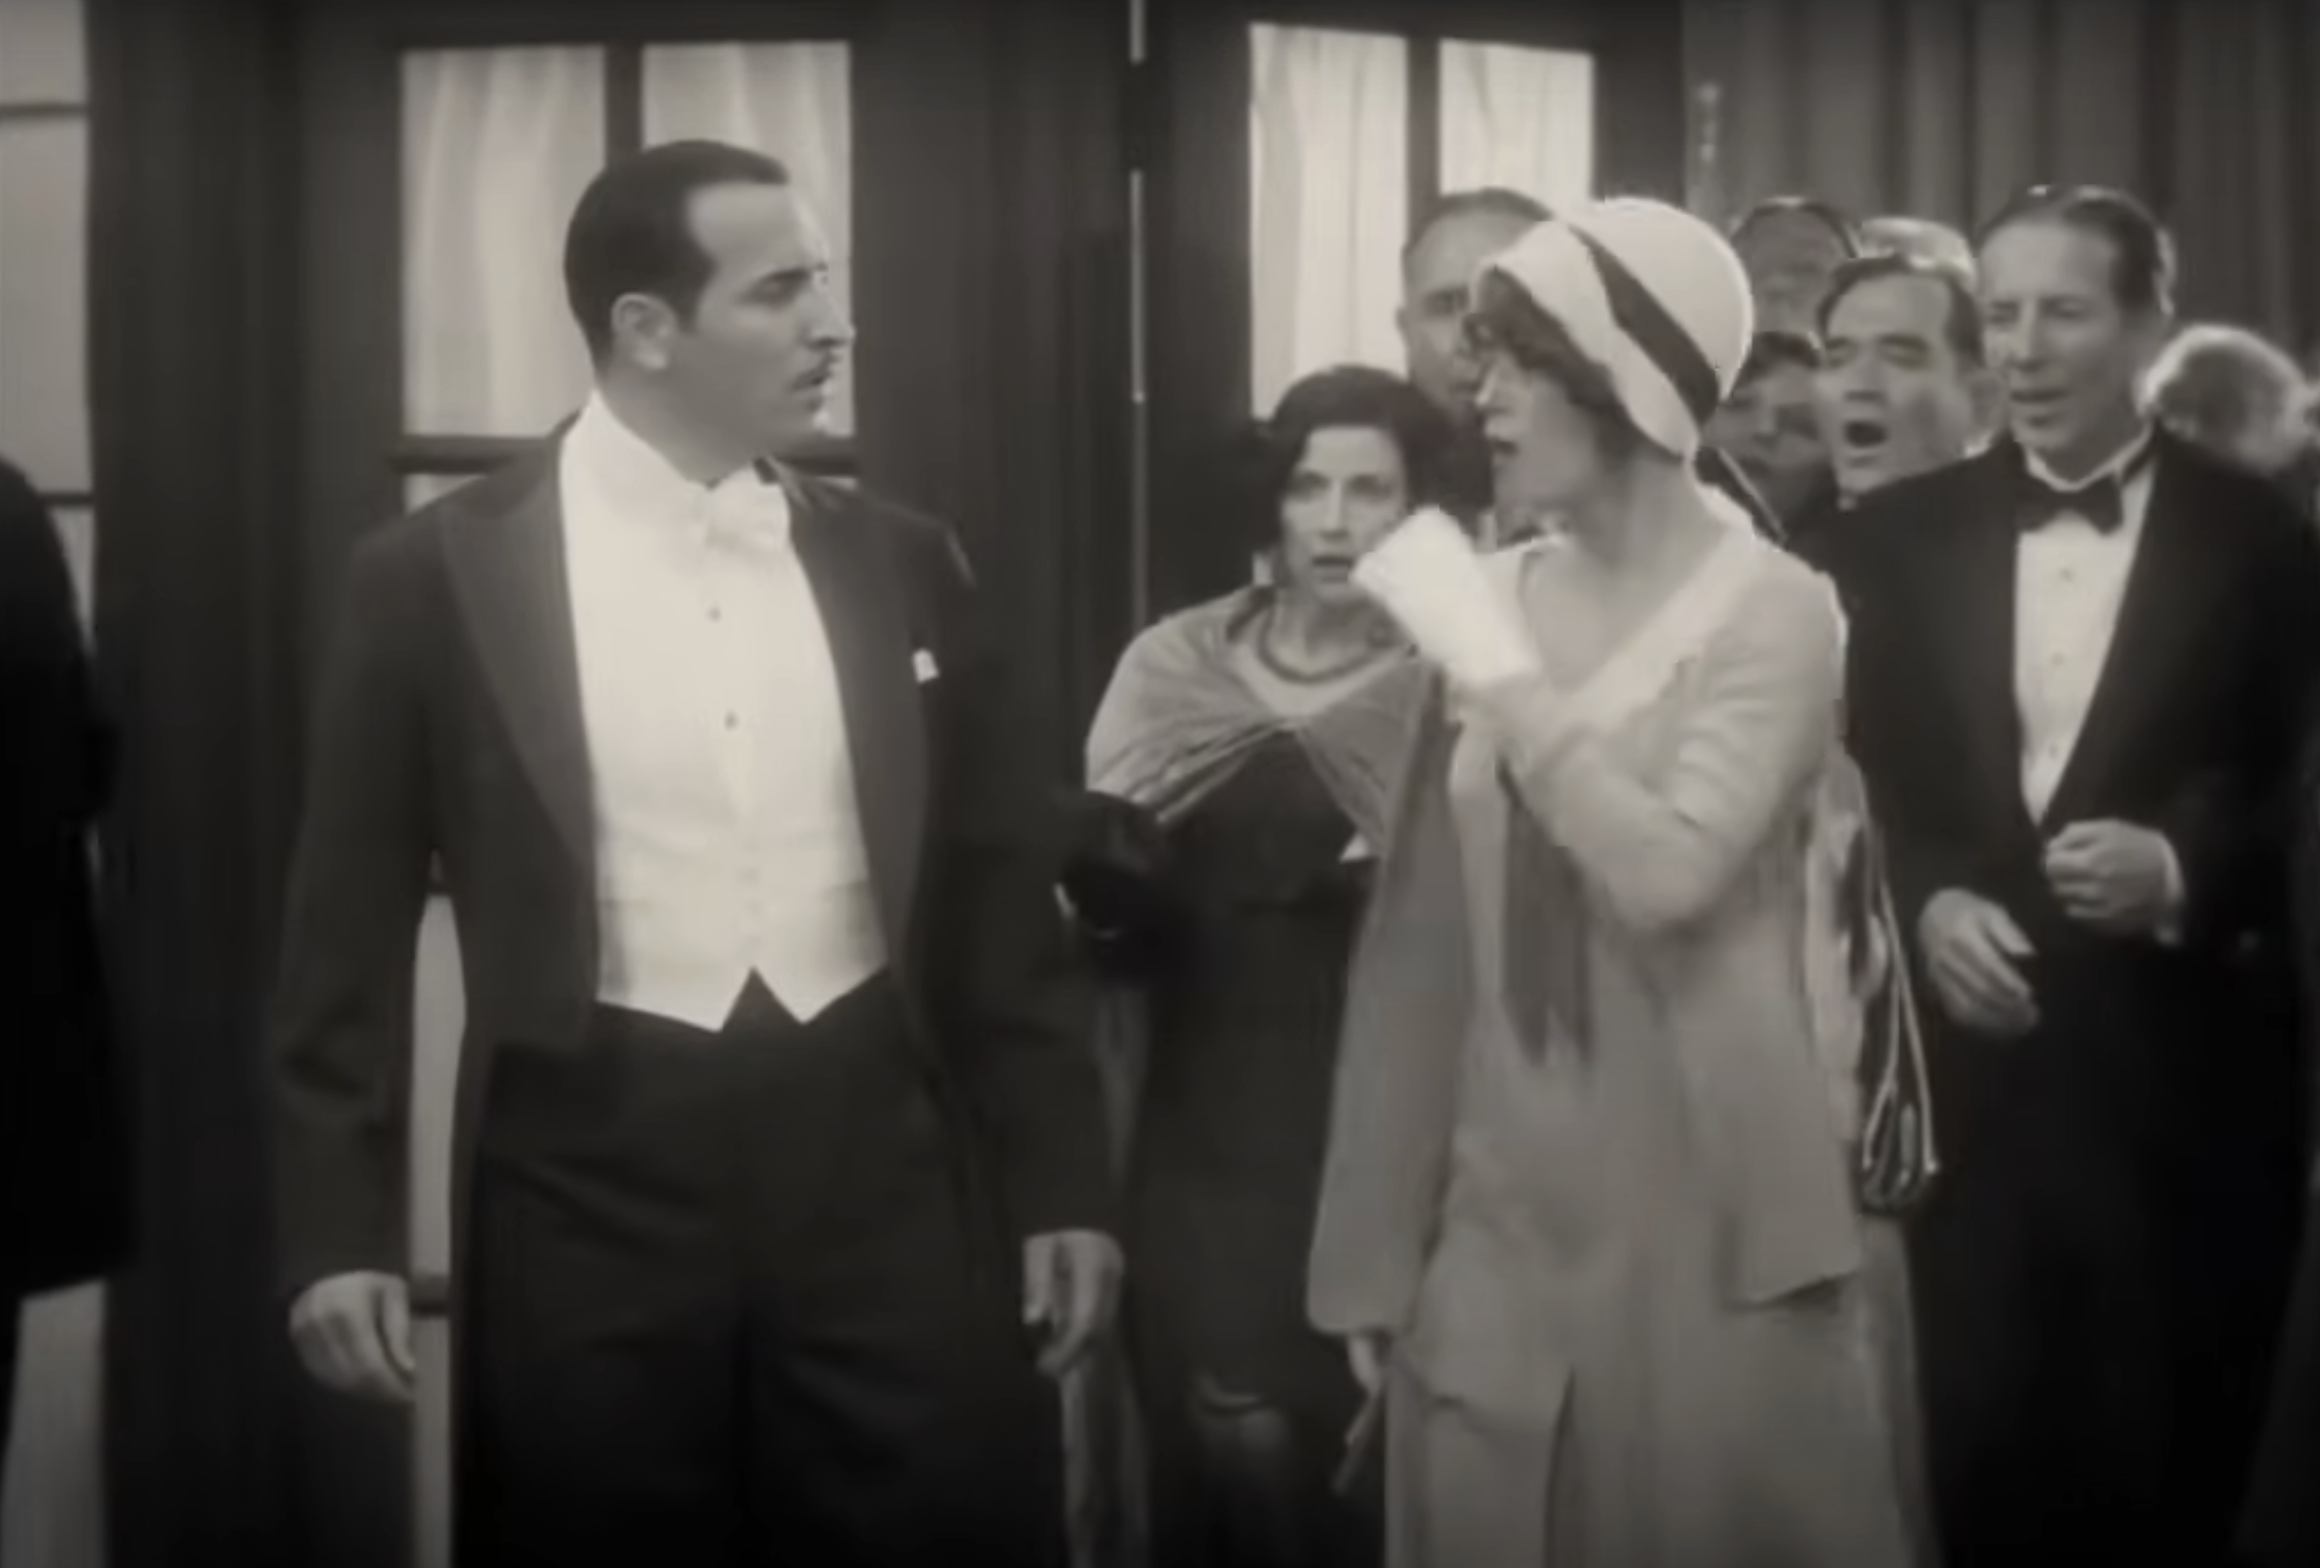 Scene from The Artist featuring actors in 1920s formal attire; man in a tuxedo and woman in a flapper dress with a headband